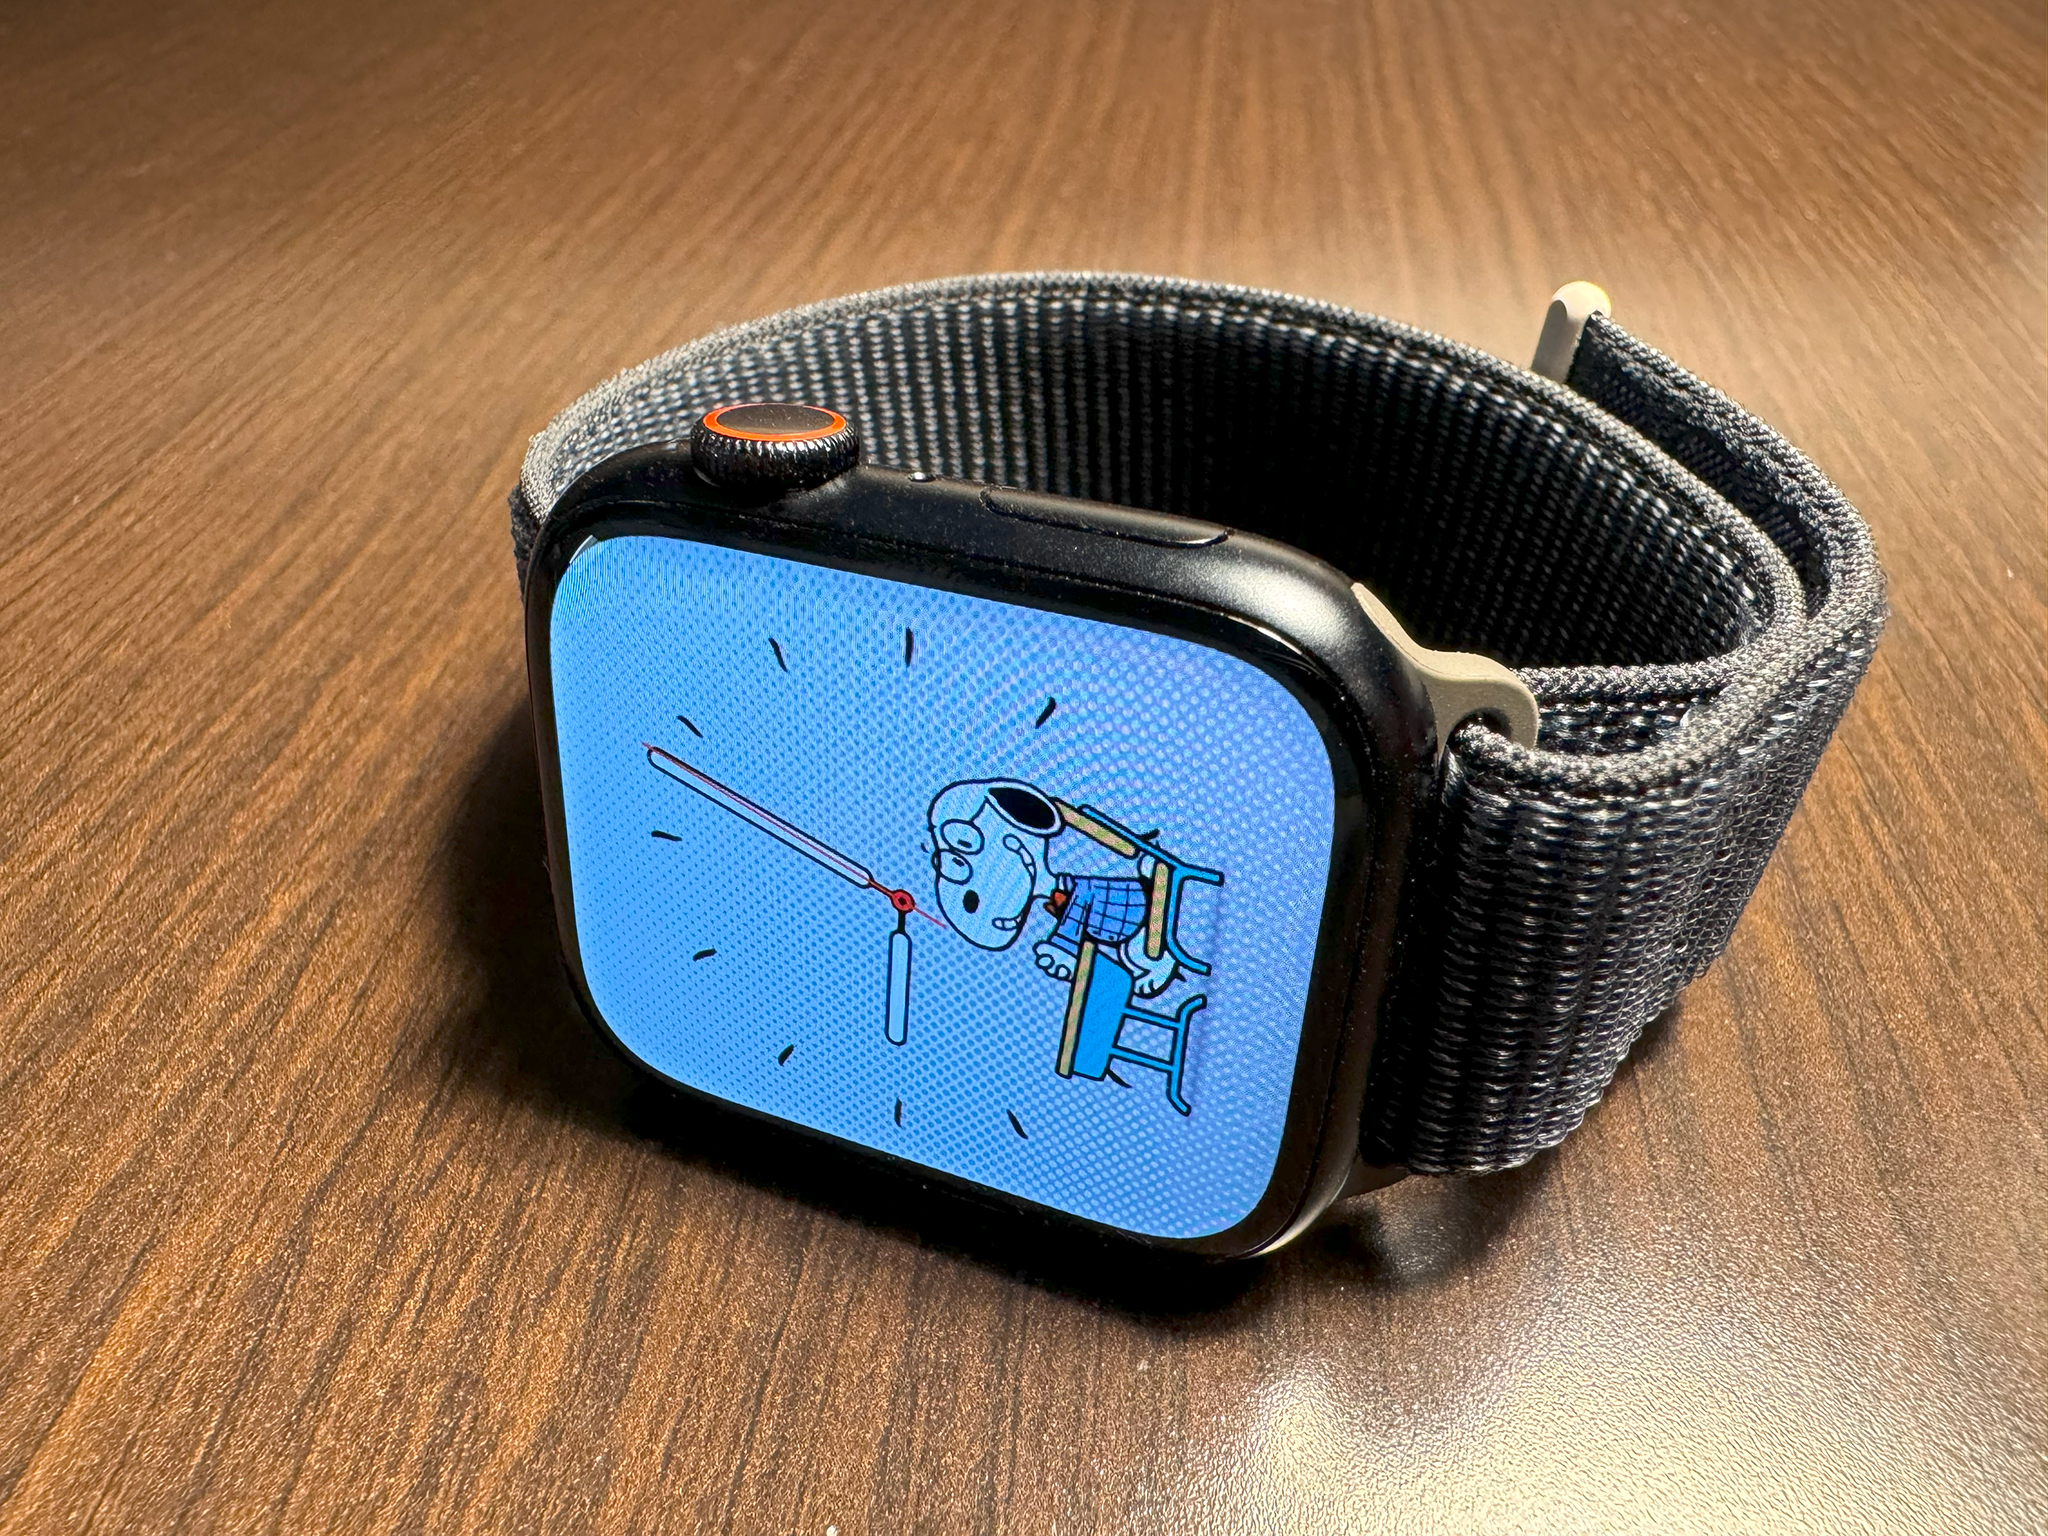 Apple Watch Series 9 review: all in good time